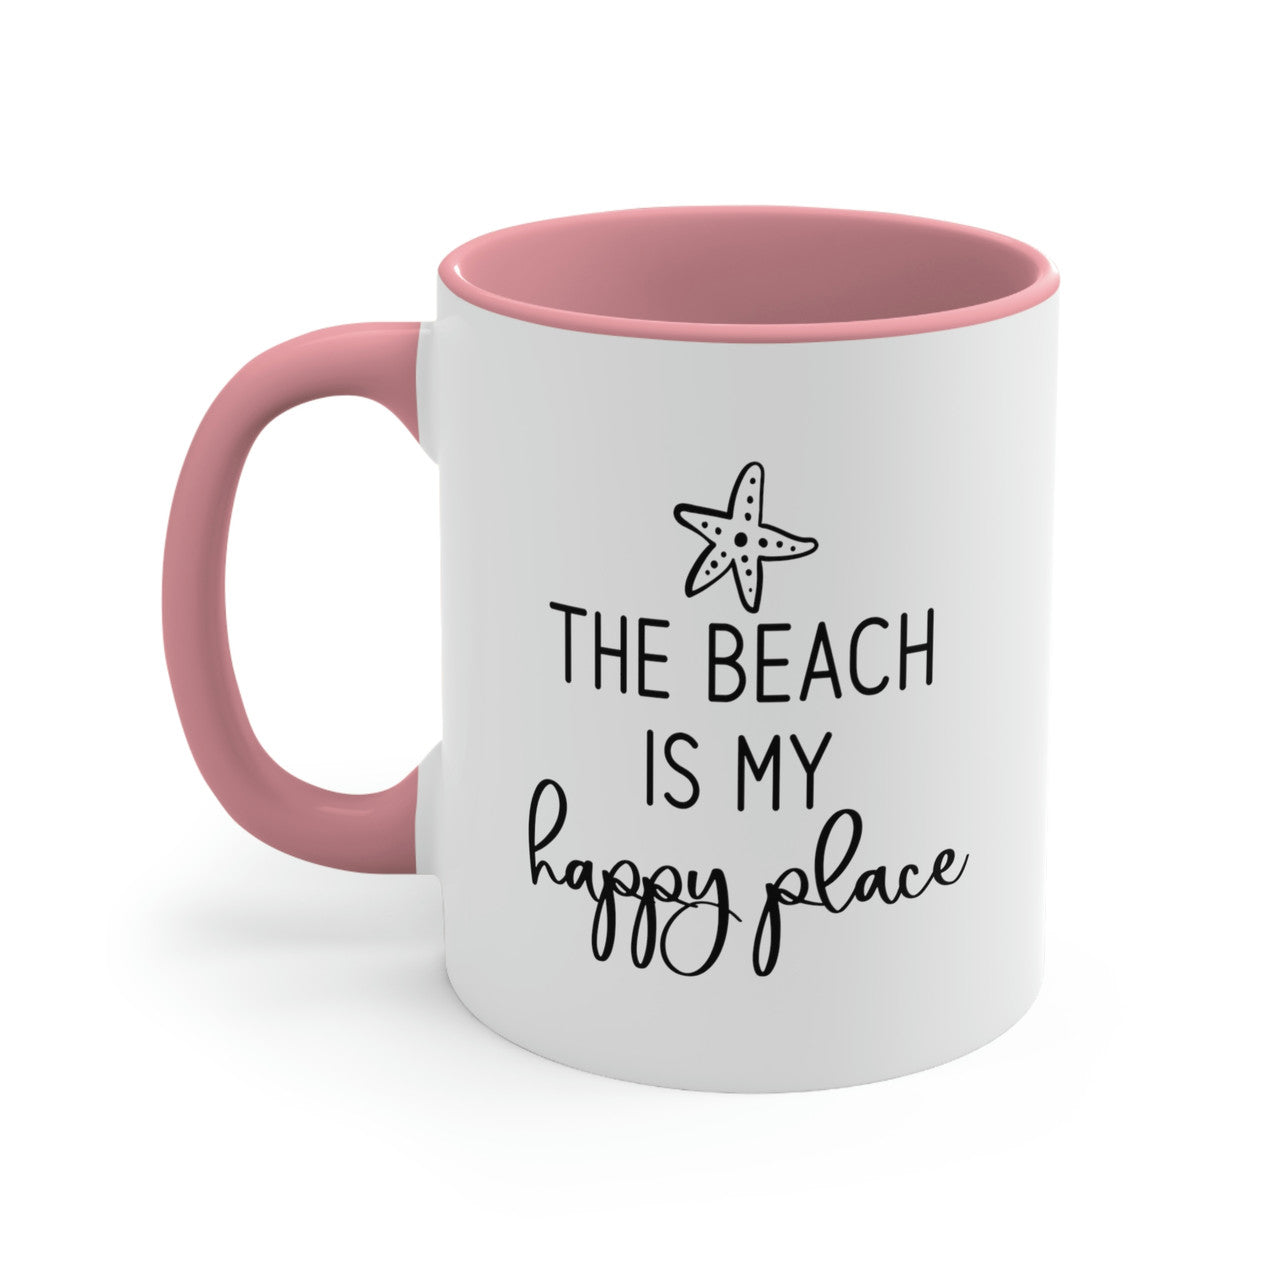 The Beach Is My Happy Place Ceramic Coffee Mug, 5 Colors Mugs New England Trading Co Pink  